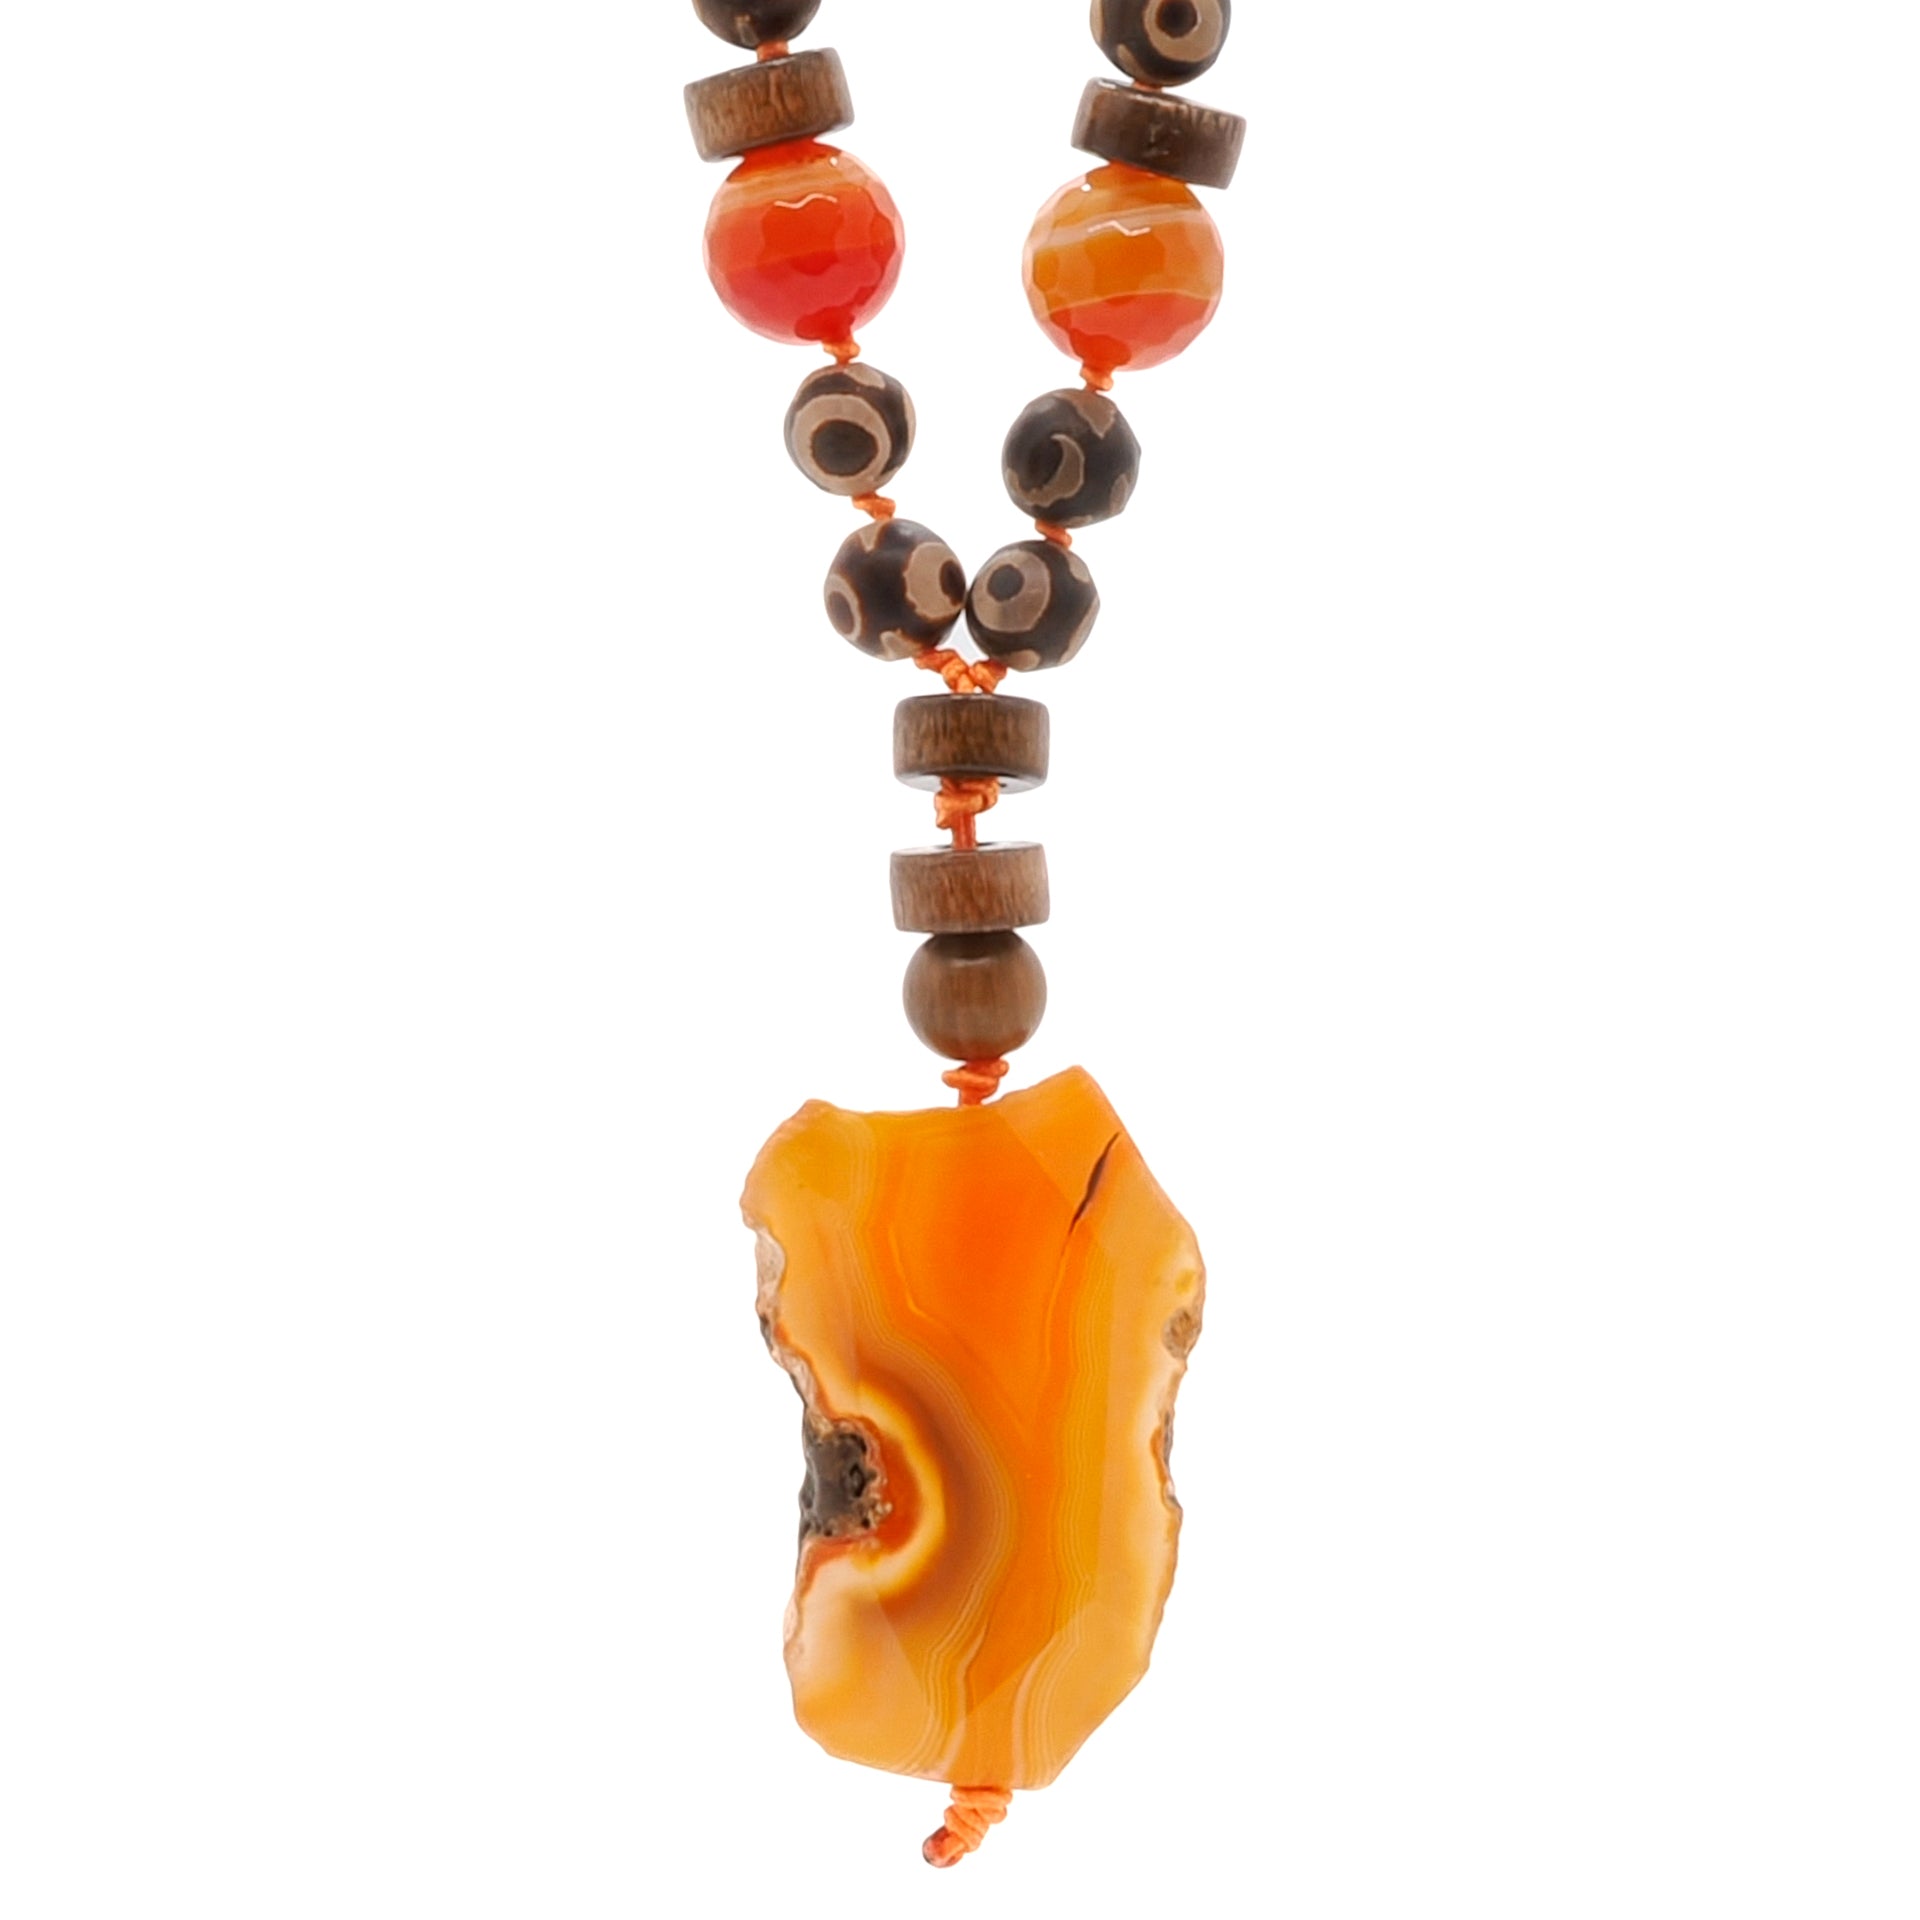 Close-up of the Healing Agate Necklace showcasing the vibrant orange agate pendant and the combination of wooden beads, orange coral, and jasper stones.